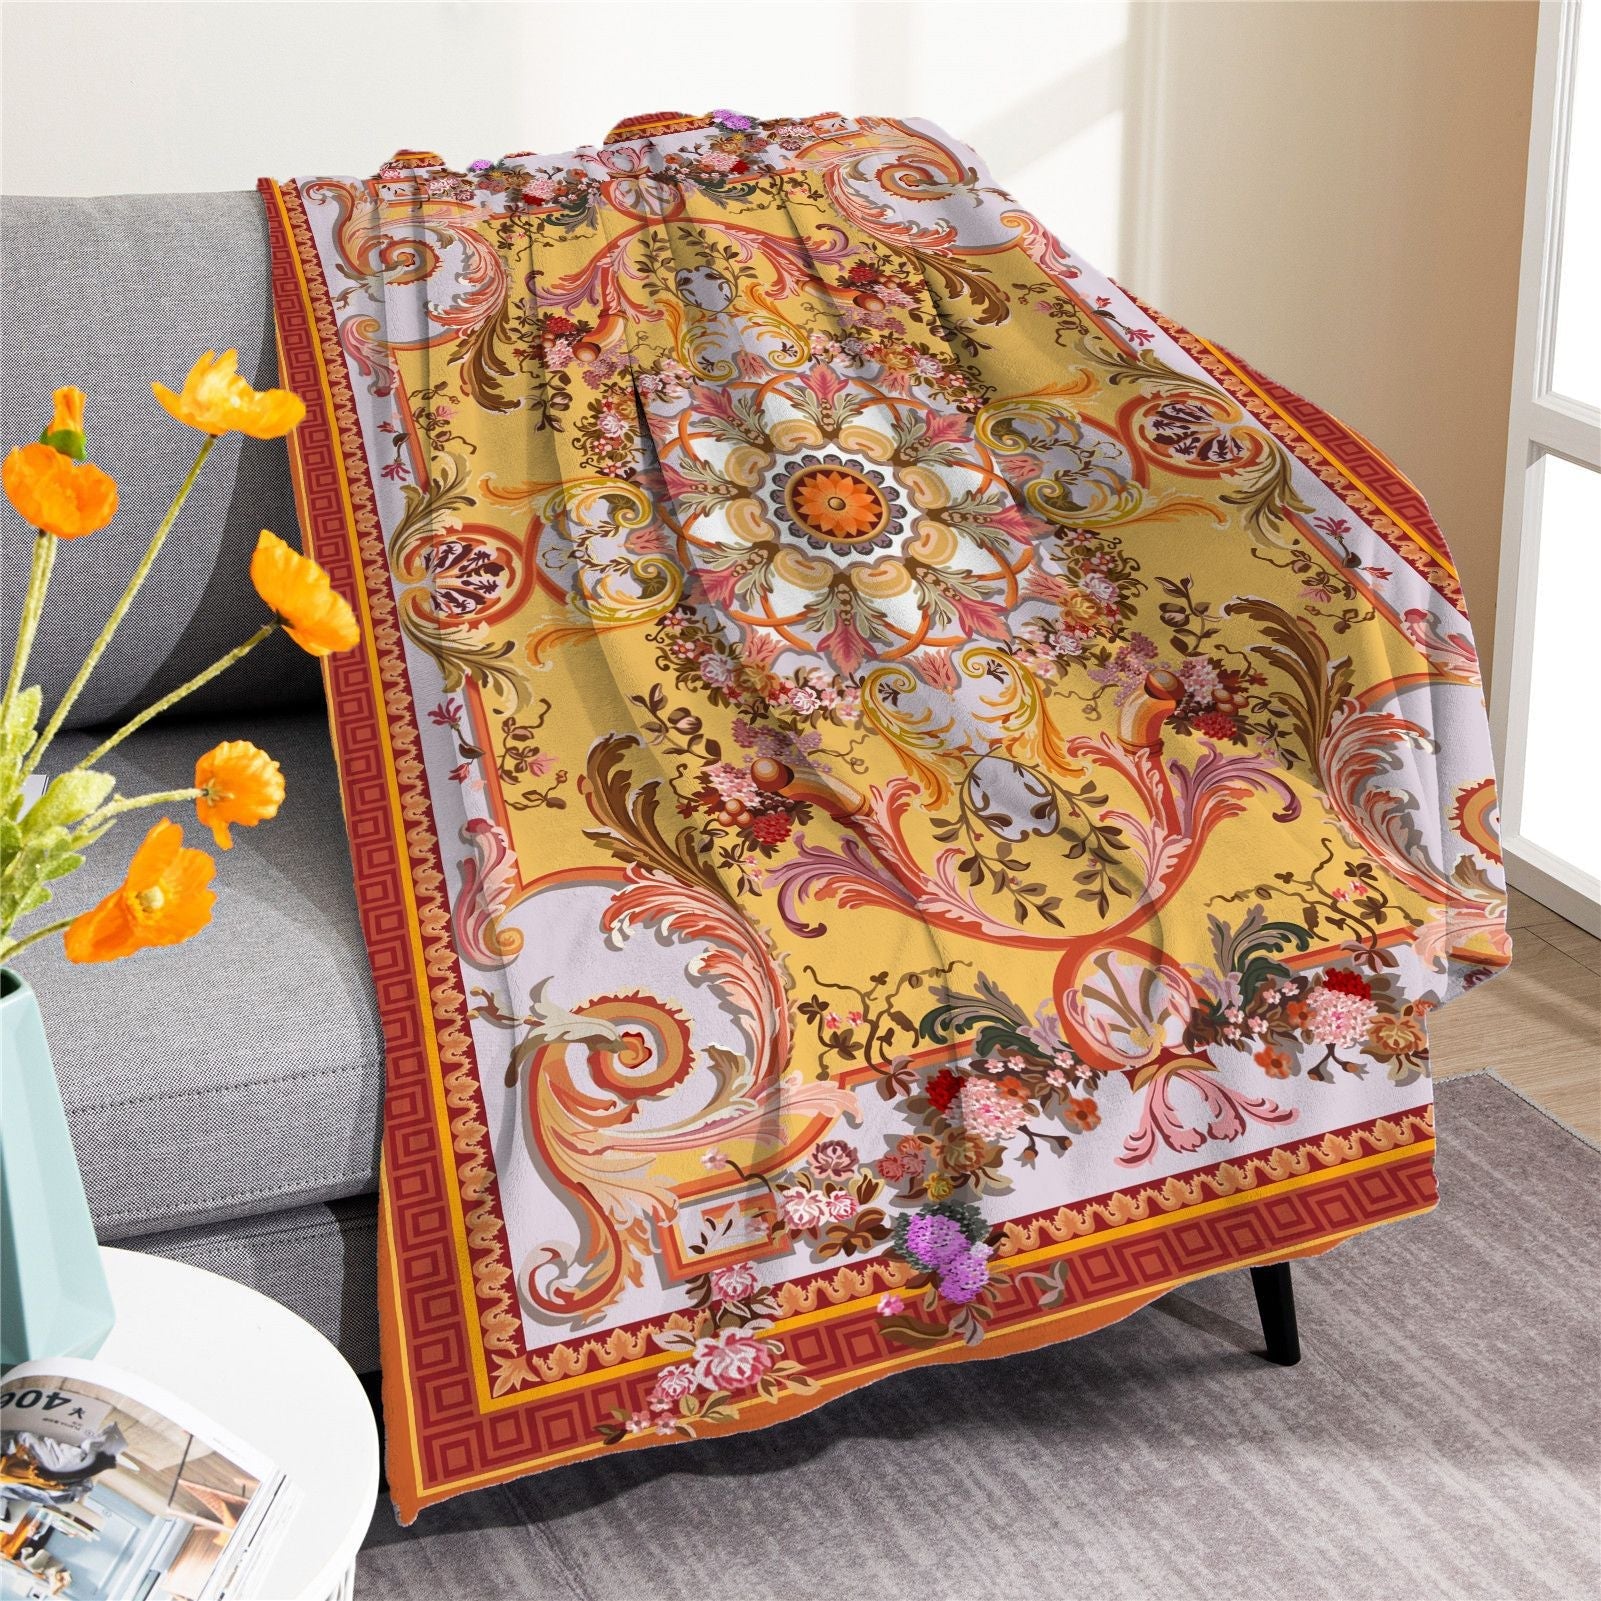 Vintage Boho Fleece Throw Blankets-Blankets-M20220701-16-50*60 Inches-Free Shipping at meselling99